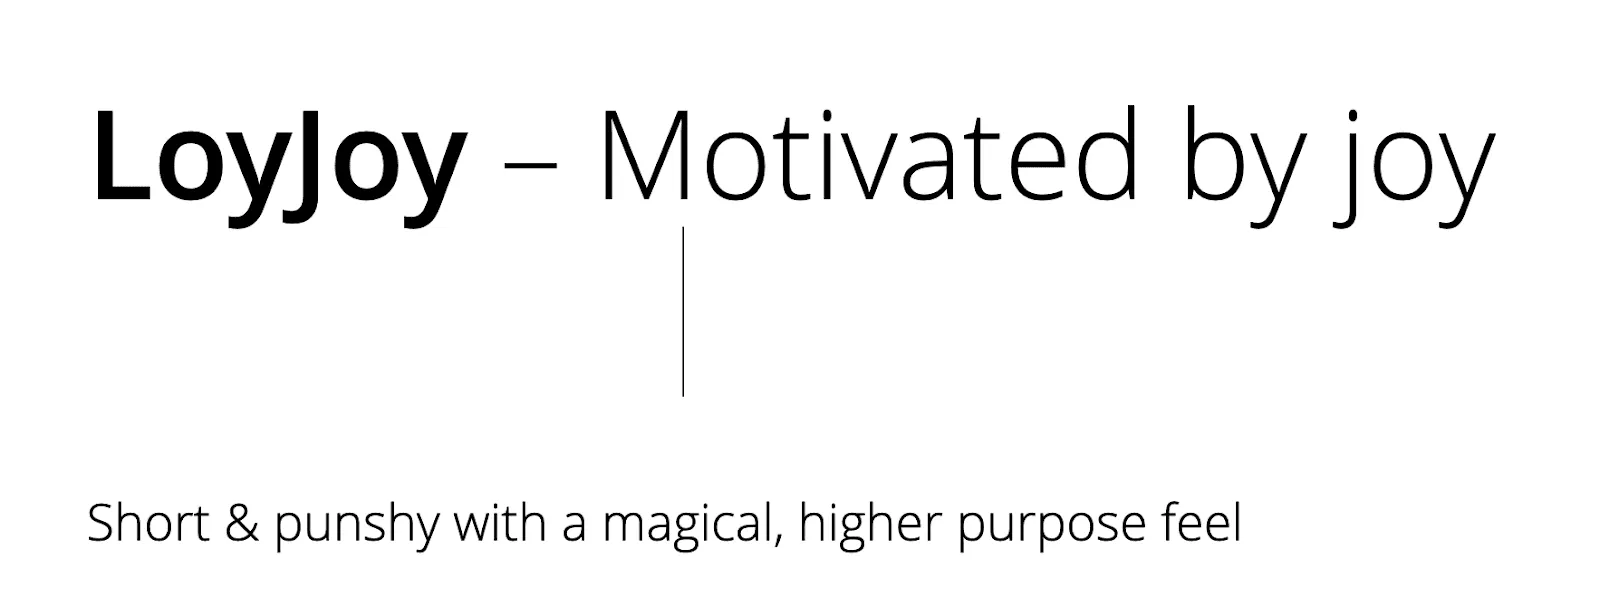 LoyJoy - Motivated by joy. Short and pushy with a magical, higher purpose feel.